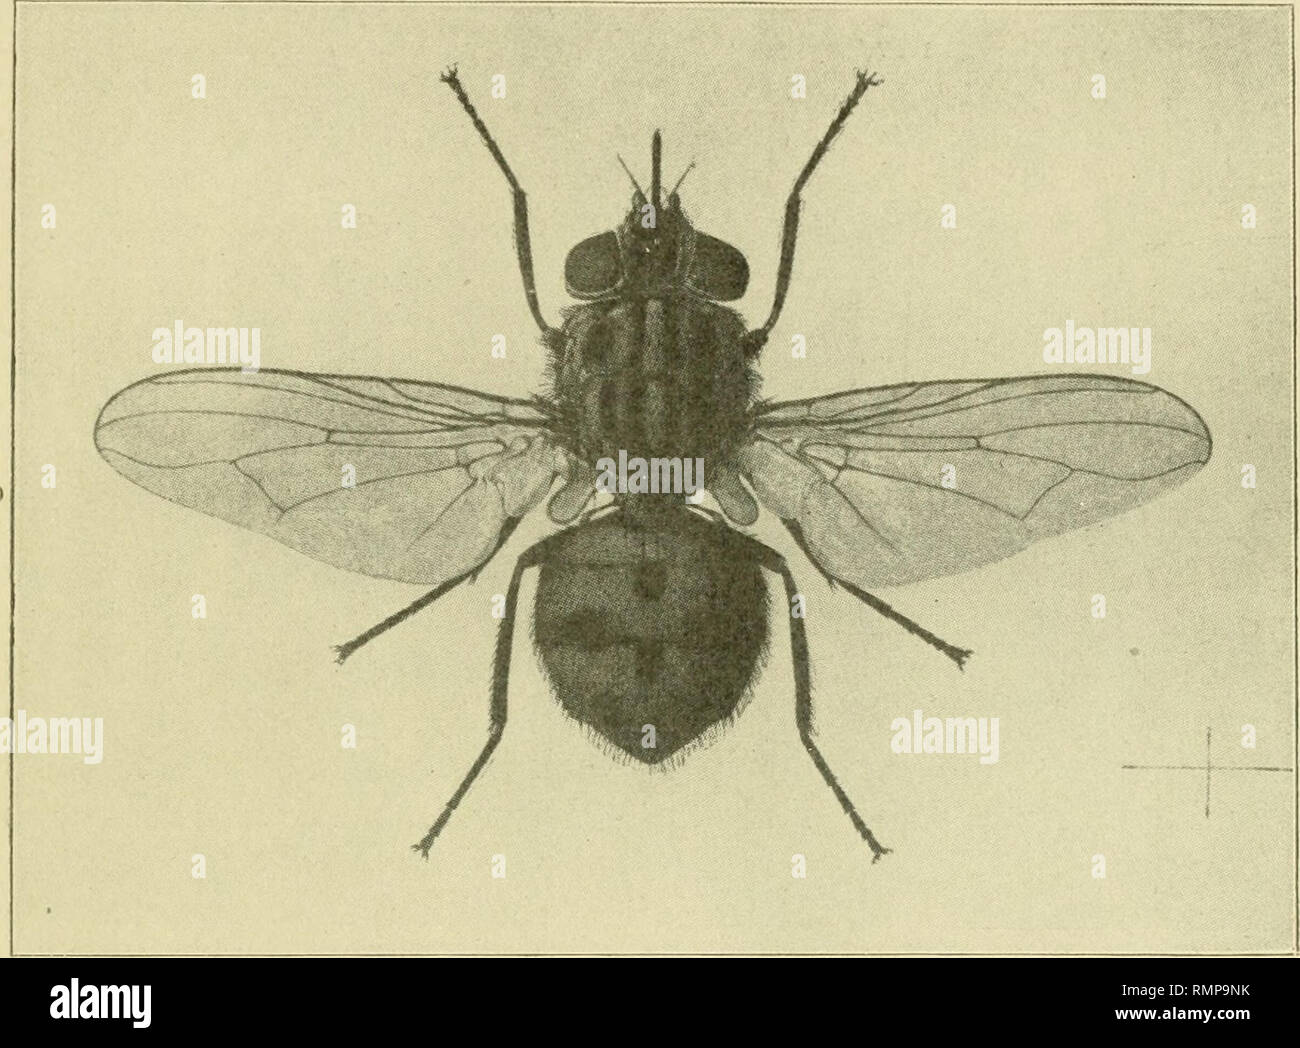 . Annals of the Entomological Society of America. Entomology. STOMOXYS CALCITRANS LINN. Chas. K. Brain, B. A., F. E. S., Entomologist.* Stomoxys calcitrans Linn, has often been suspected of being an agent in the transmission of disease, and the recent experi- ments of Rosenau, Anderson and Frost seem to show con- clusively that this insect can, and may, transmit Acute Poliomyelitis in animals—monkeys were used.. Fig. 1. Stomoxys calcitrans Linn. 9- (After Austen.) It is not said that Stomoxys calcitrans is the actual carrier of Infantile Paralysis in Nature, but its com.mon occurrence in local Stock Photo